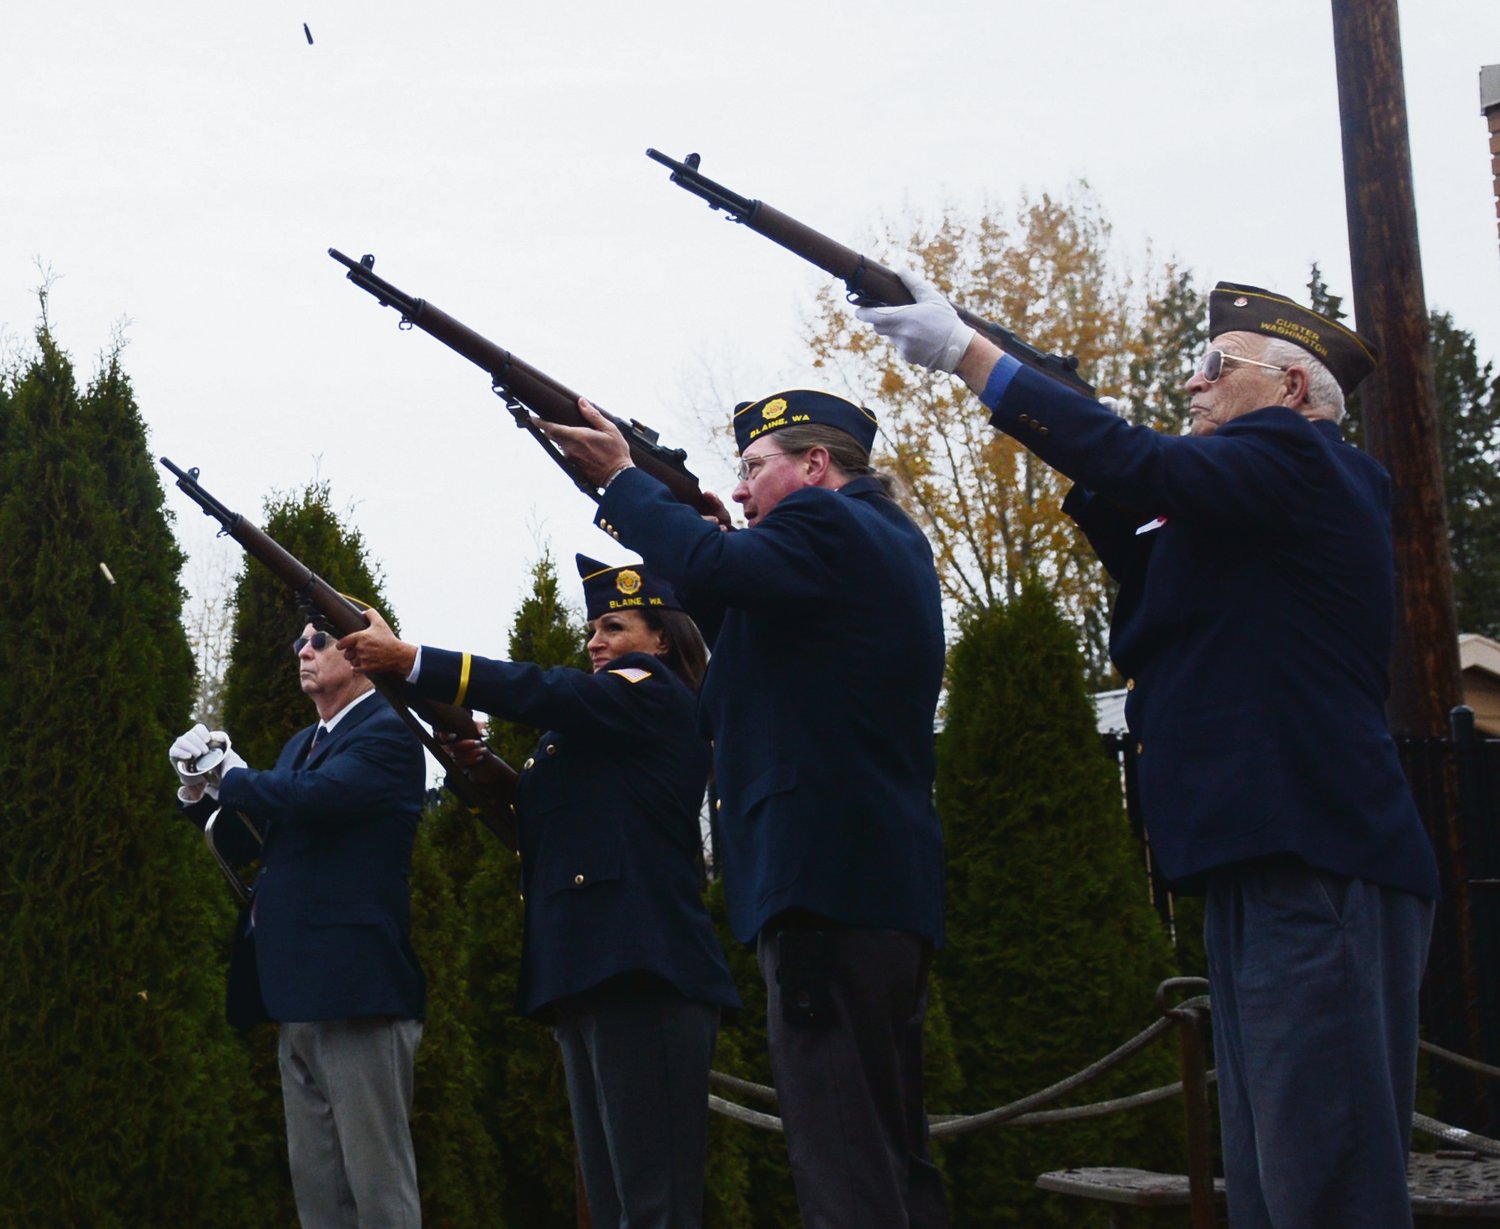 The Veterans of Foreign Wars Post 9474 and American Legion Post 86 honored those who have served during the annual Veterans Day tribute at Veterans Memorial Park in Blaine on November 11.